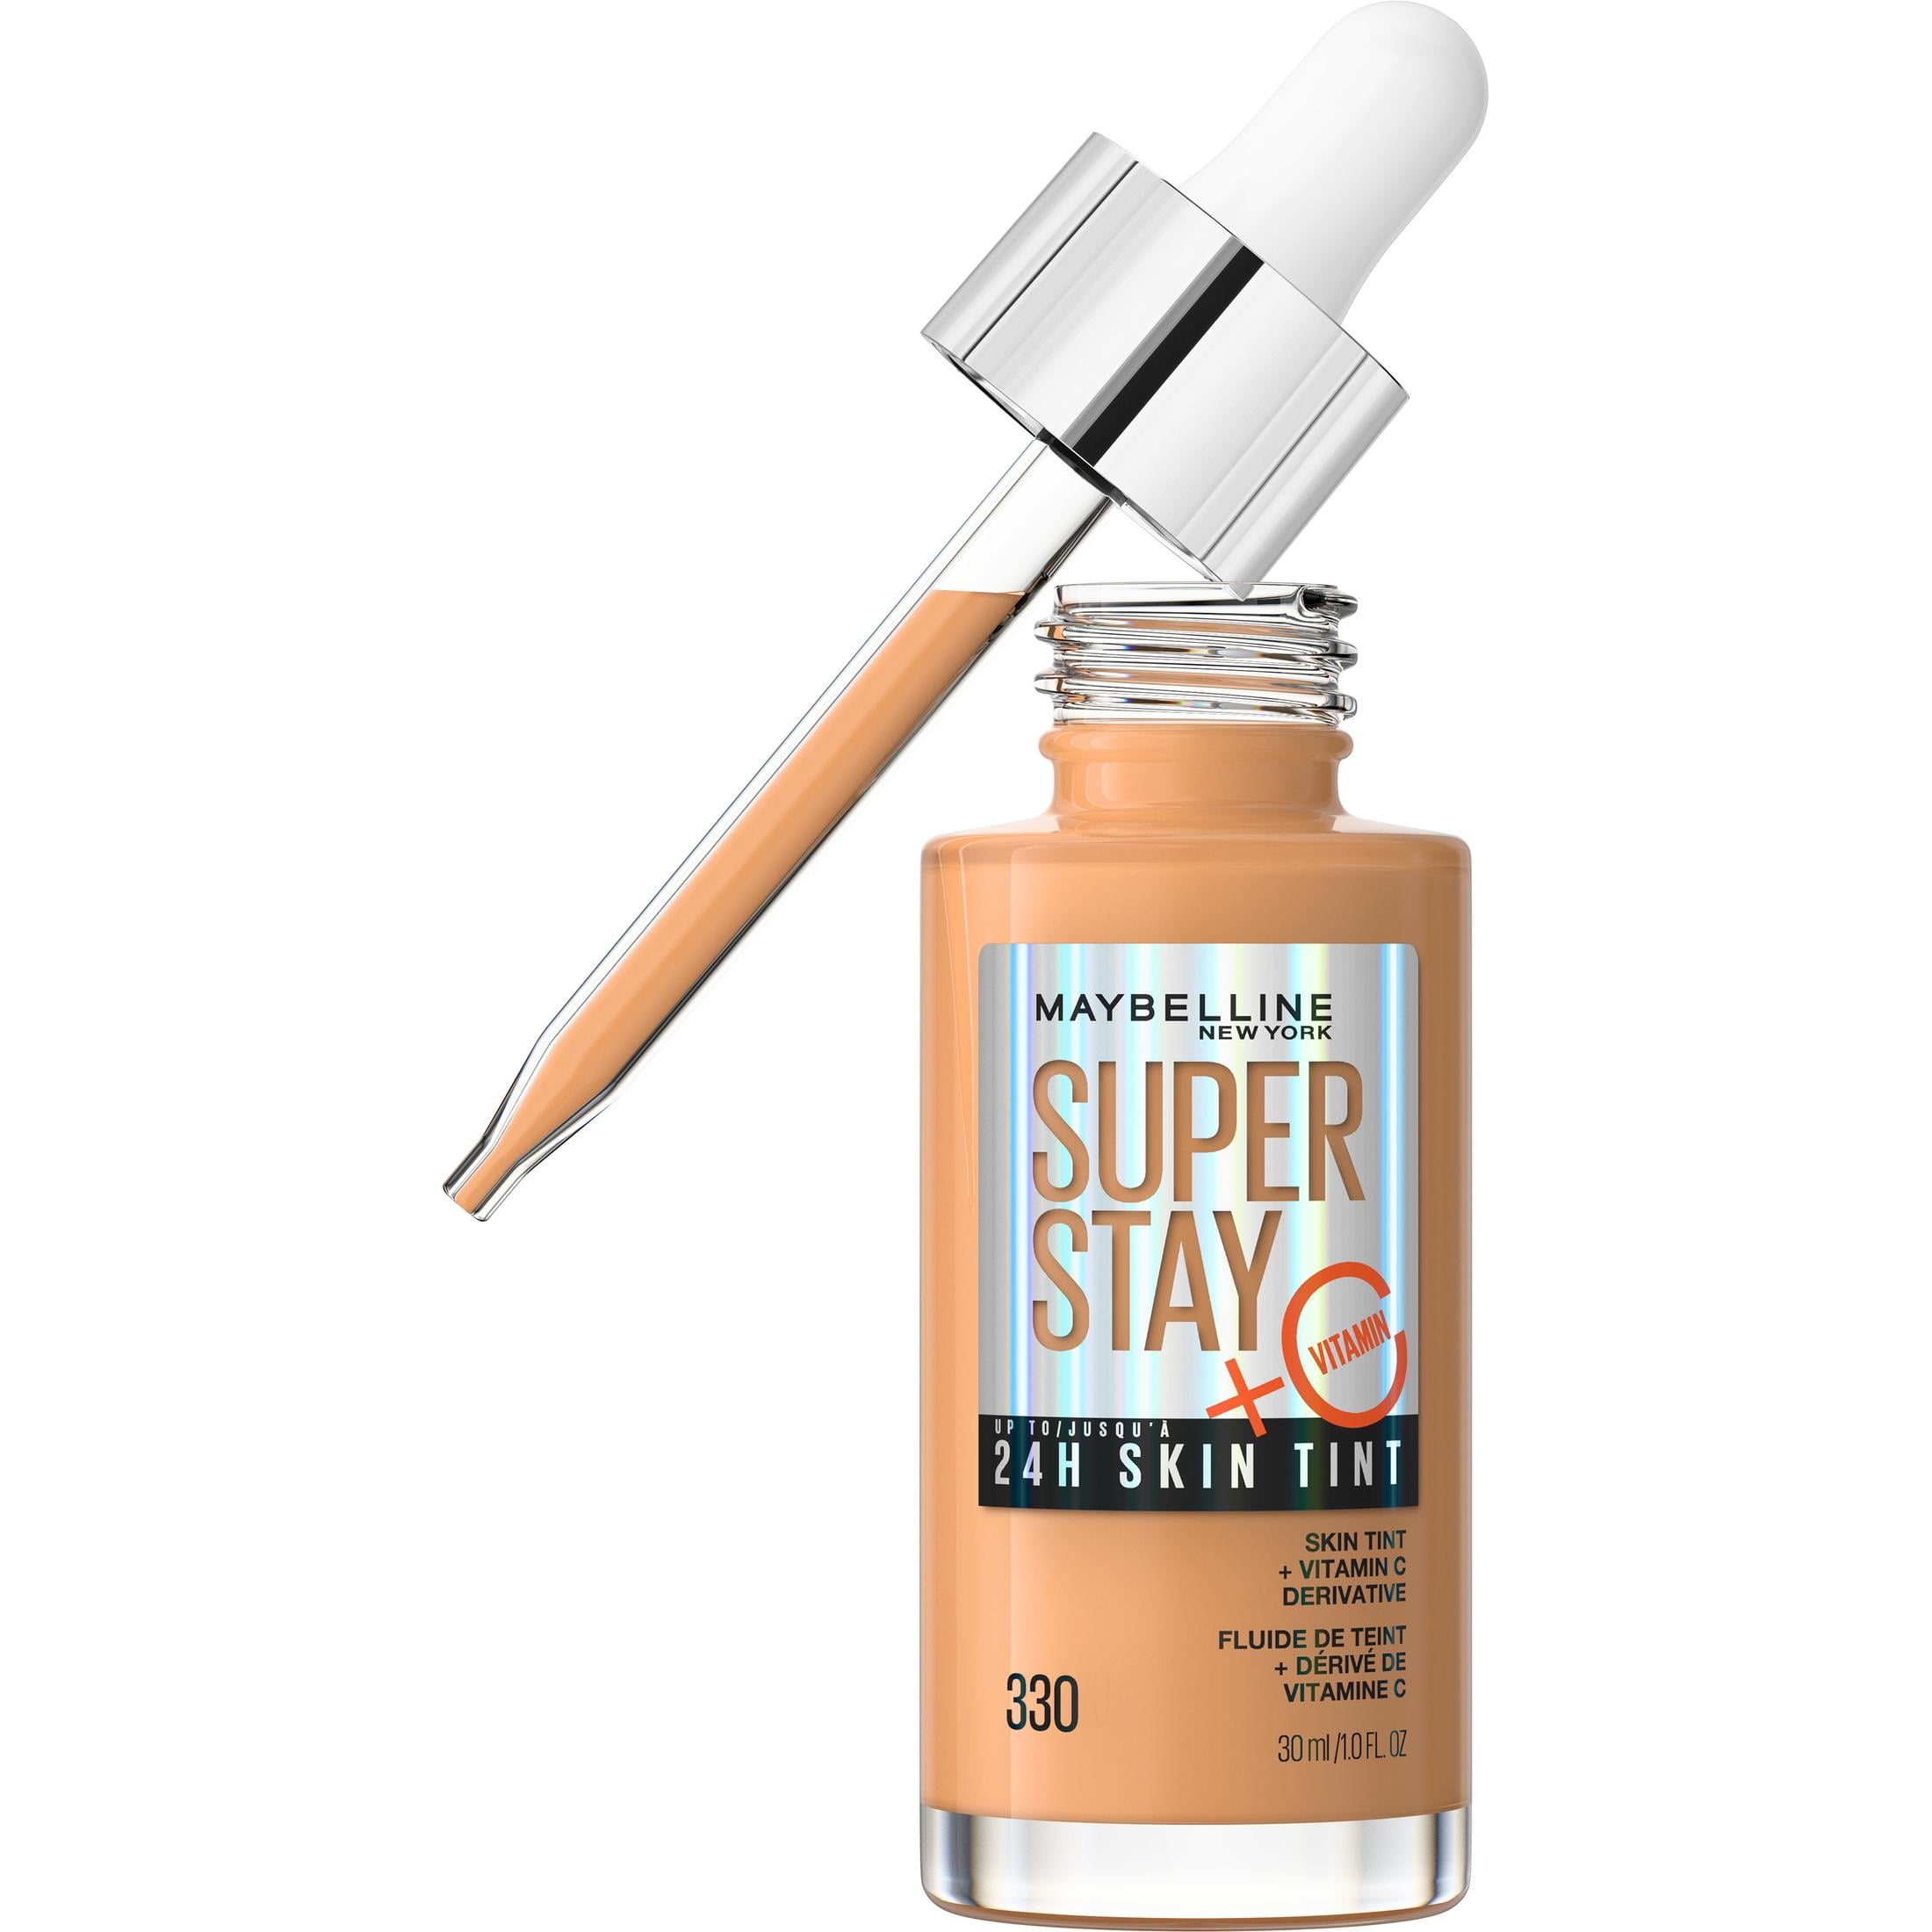 Maybelline Superstay 24Hr Skin Tint + Vitamin C Review